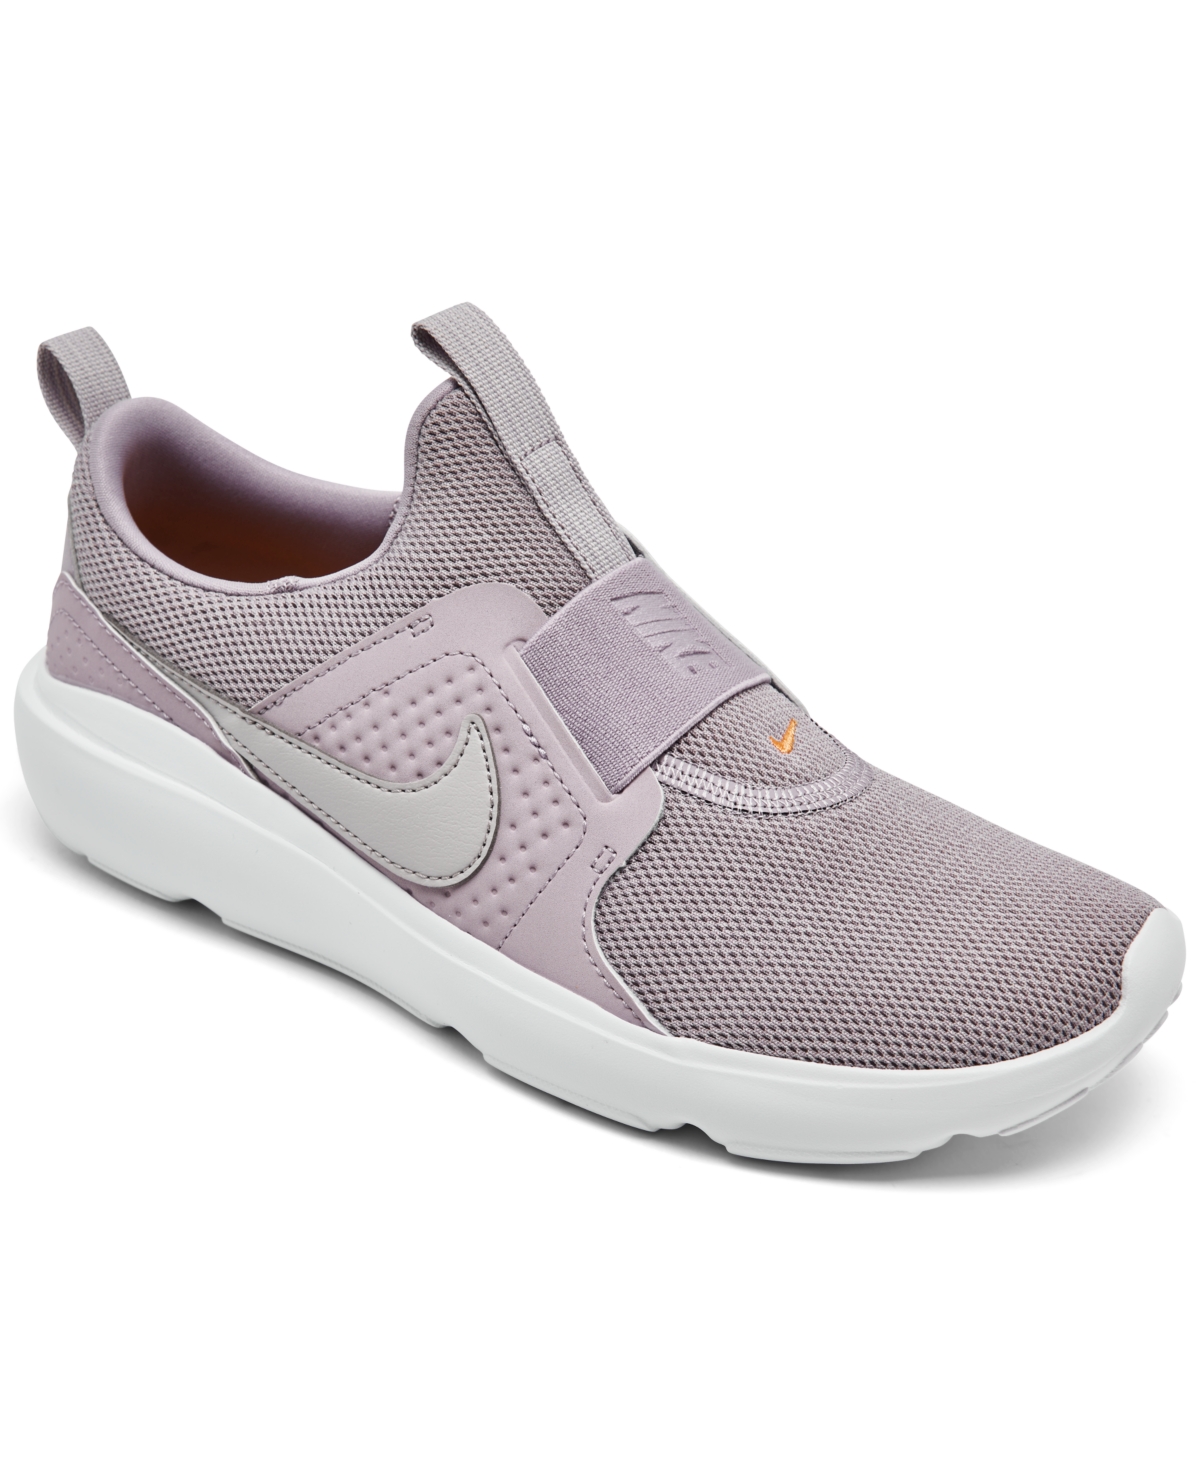 Nike Comfort Slip-On Casual Sneakers from Finish Line - Macy's